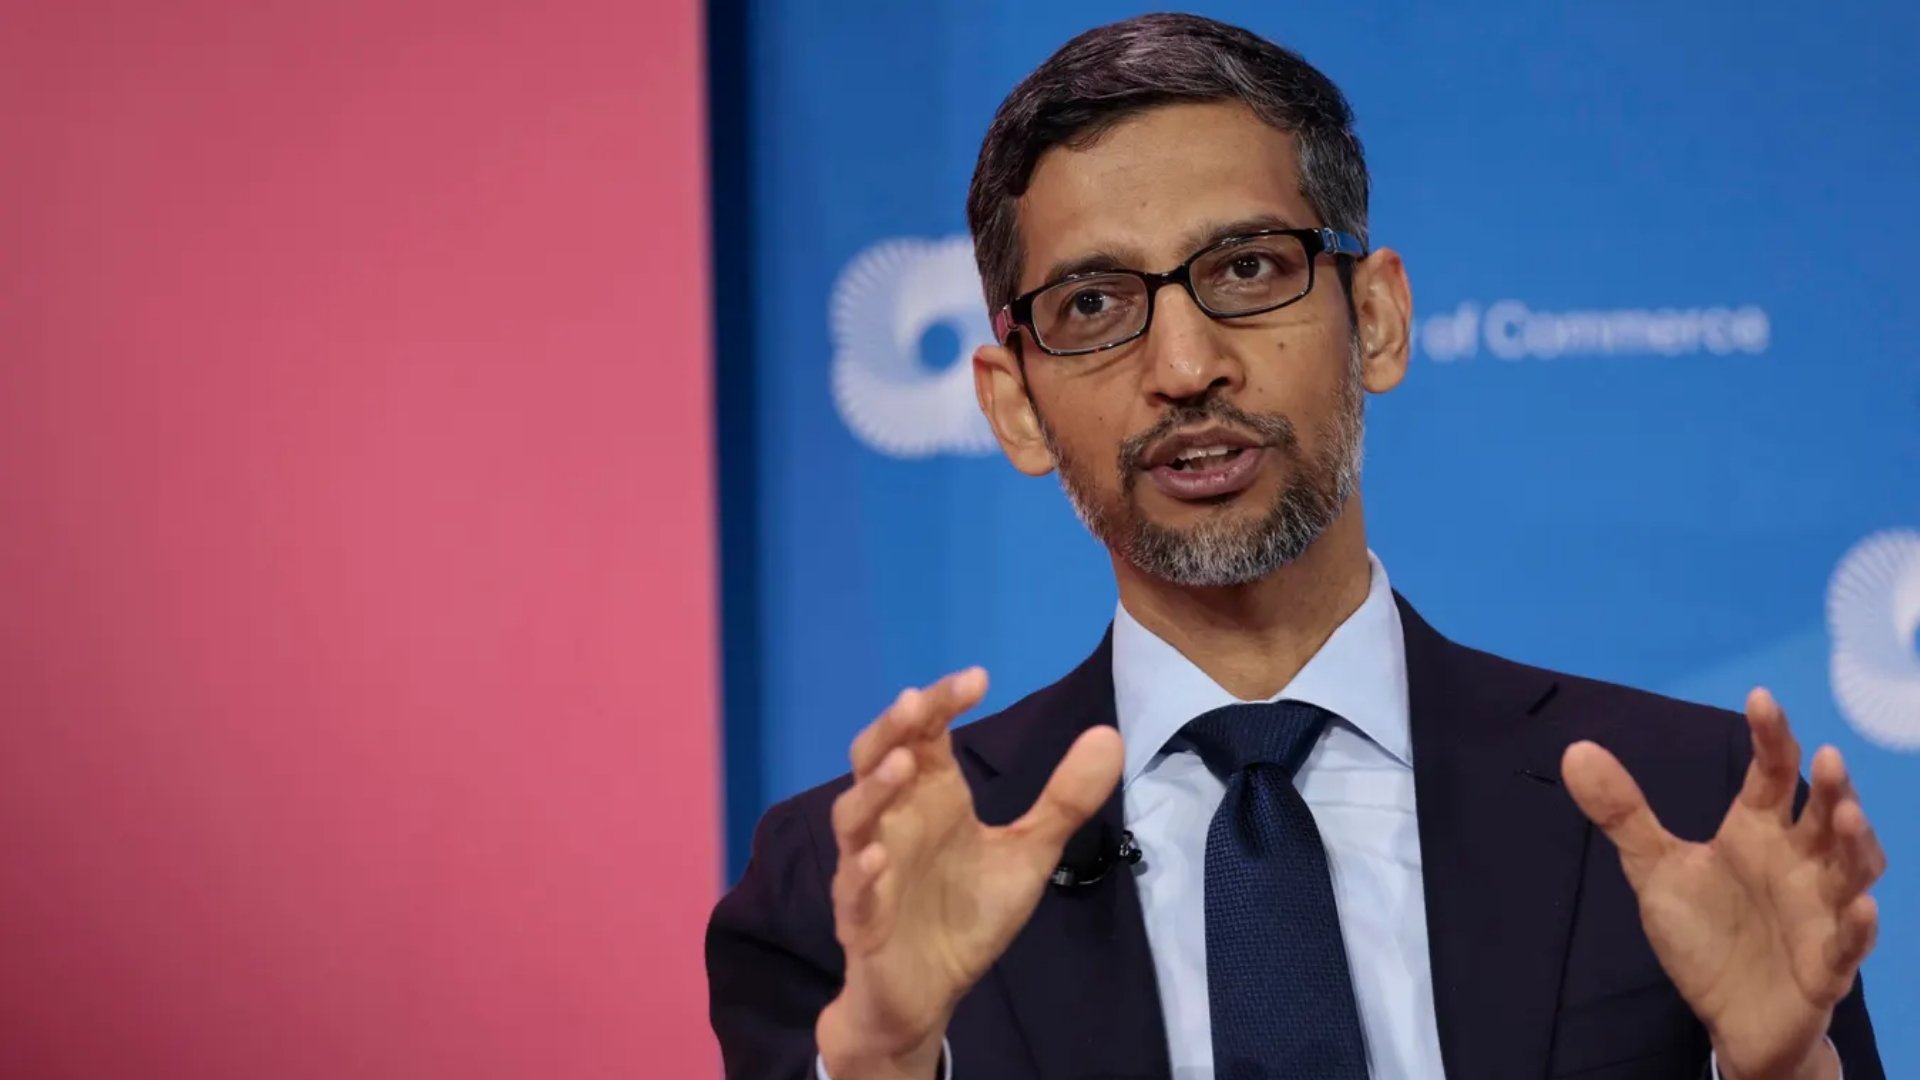 An internal memo from the CEO of Google foreshadows further layoffs.